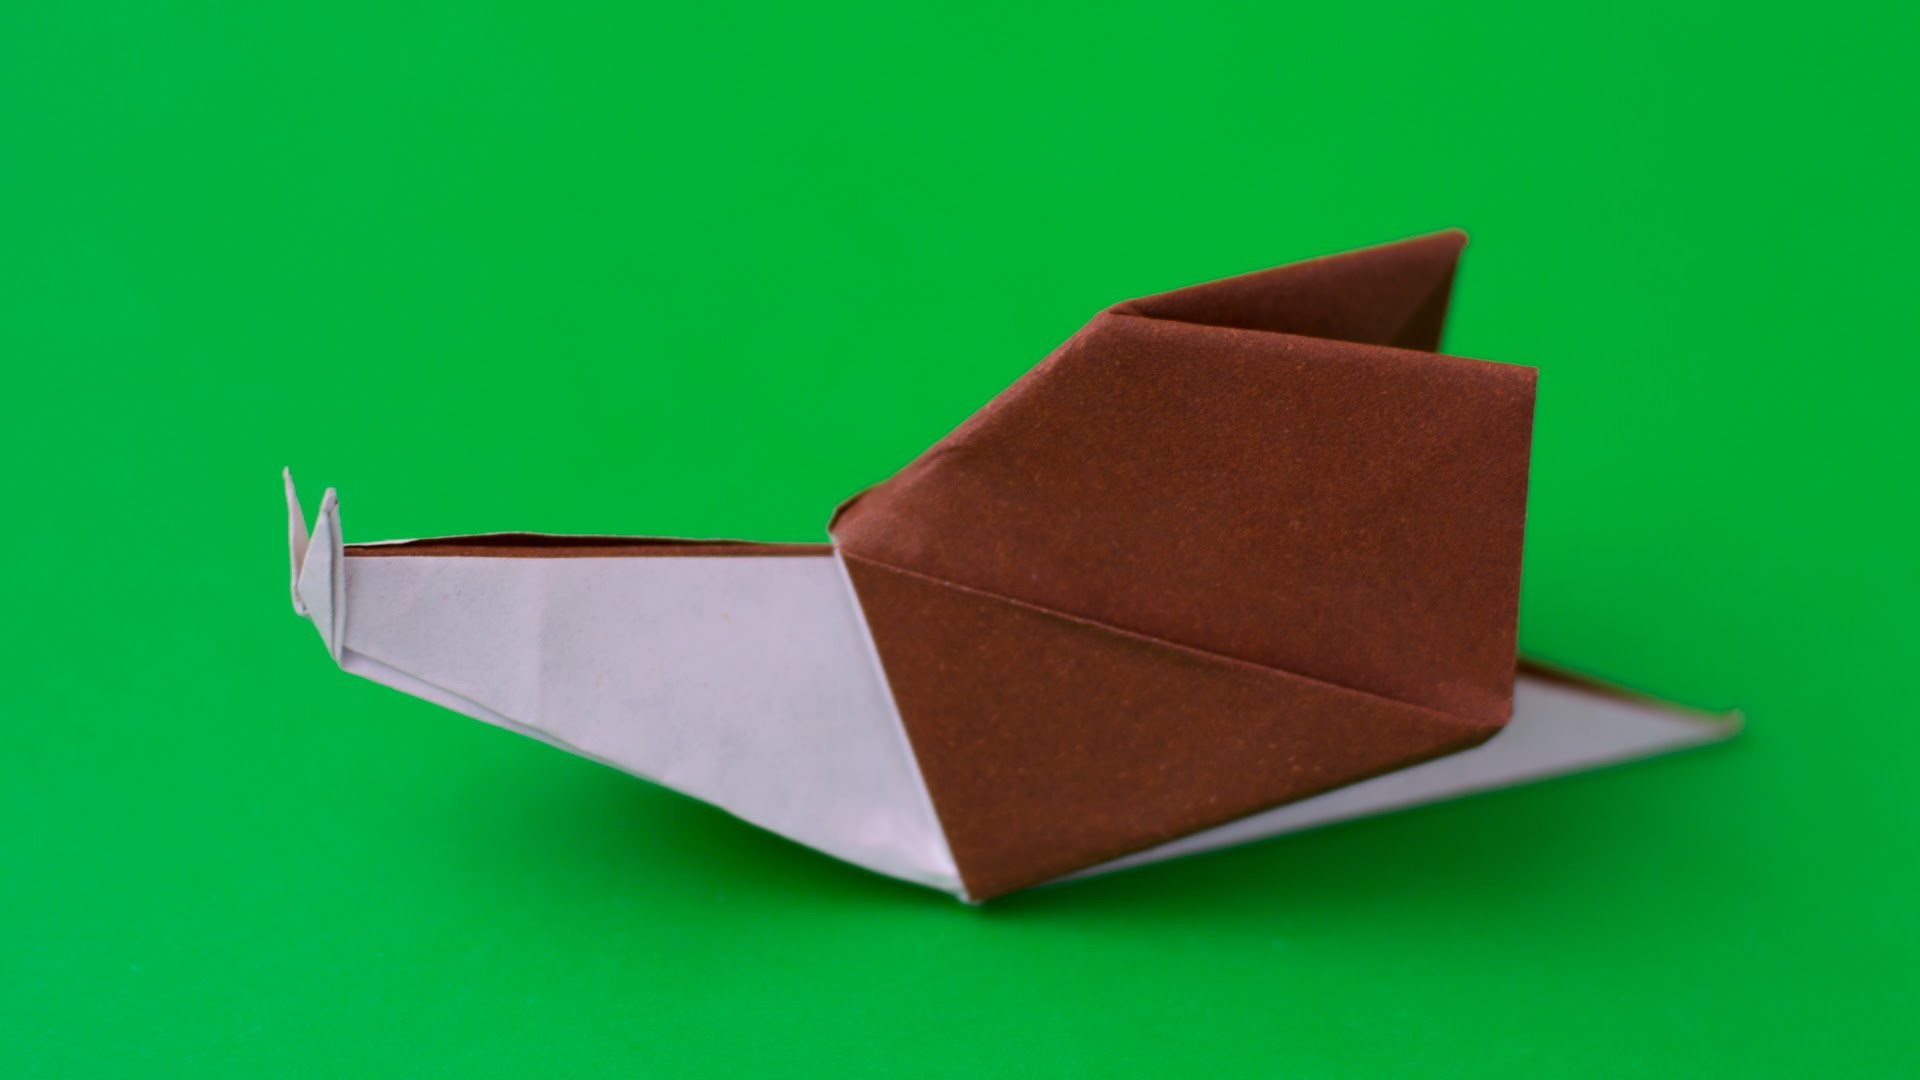 Origami Snail. How to make paper origami snail easy